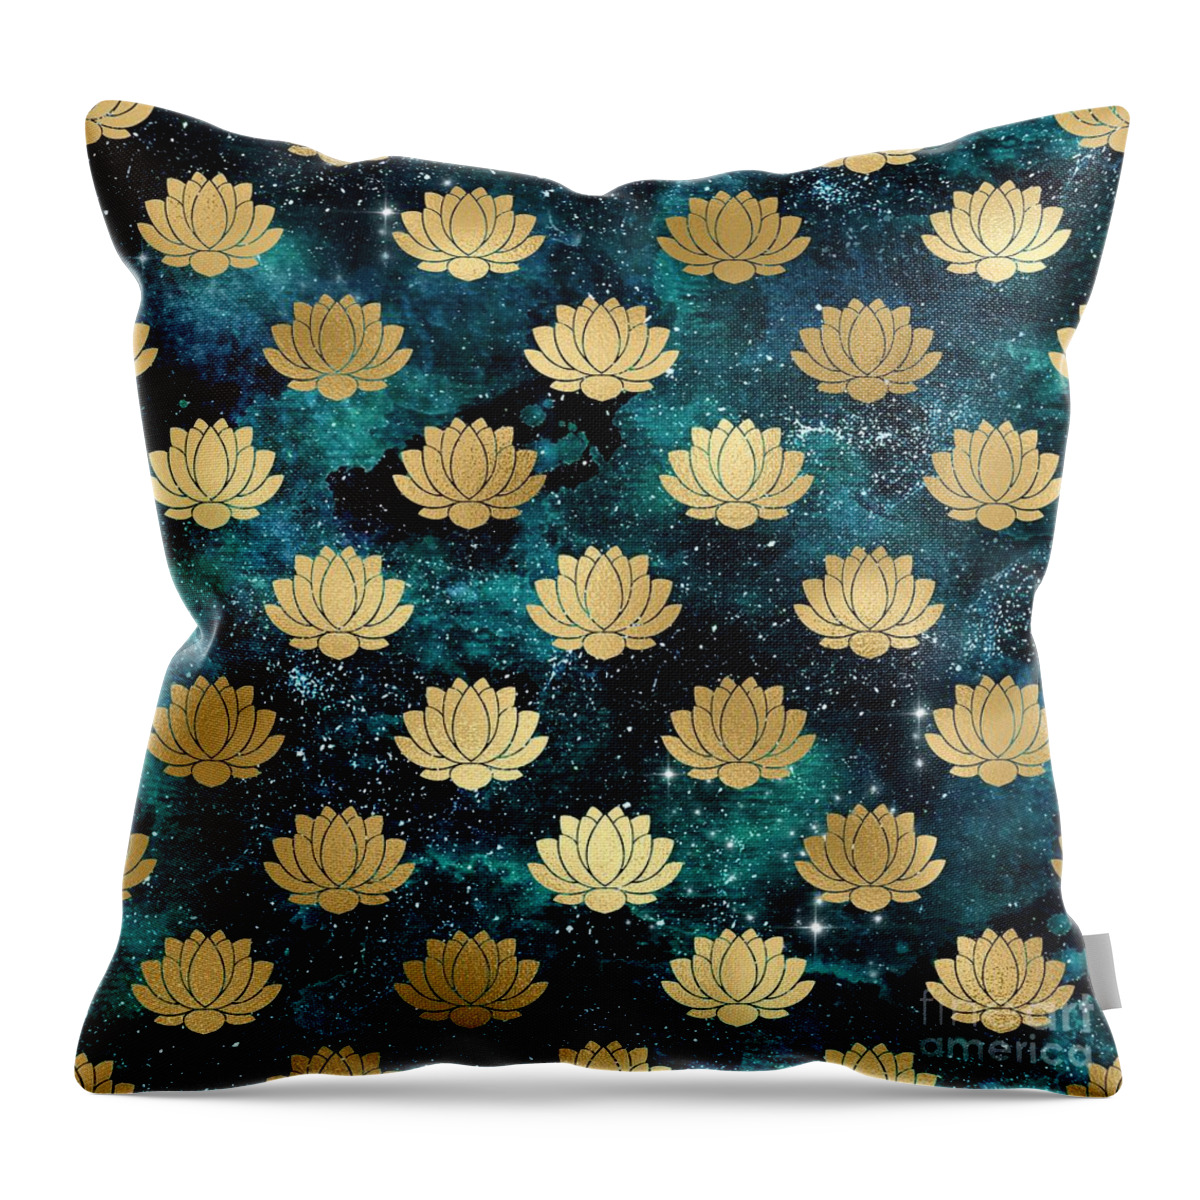 Watercolor Throw Pillow featuring the digital art Rivala - Teal Gold Watercolor Lotus Galaxy Dharma Pattern by Sambel Pedes